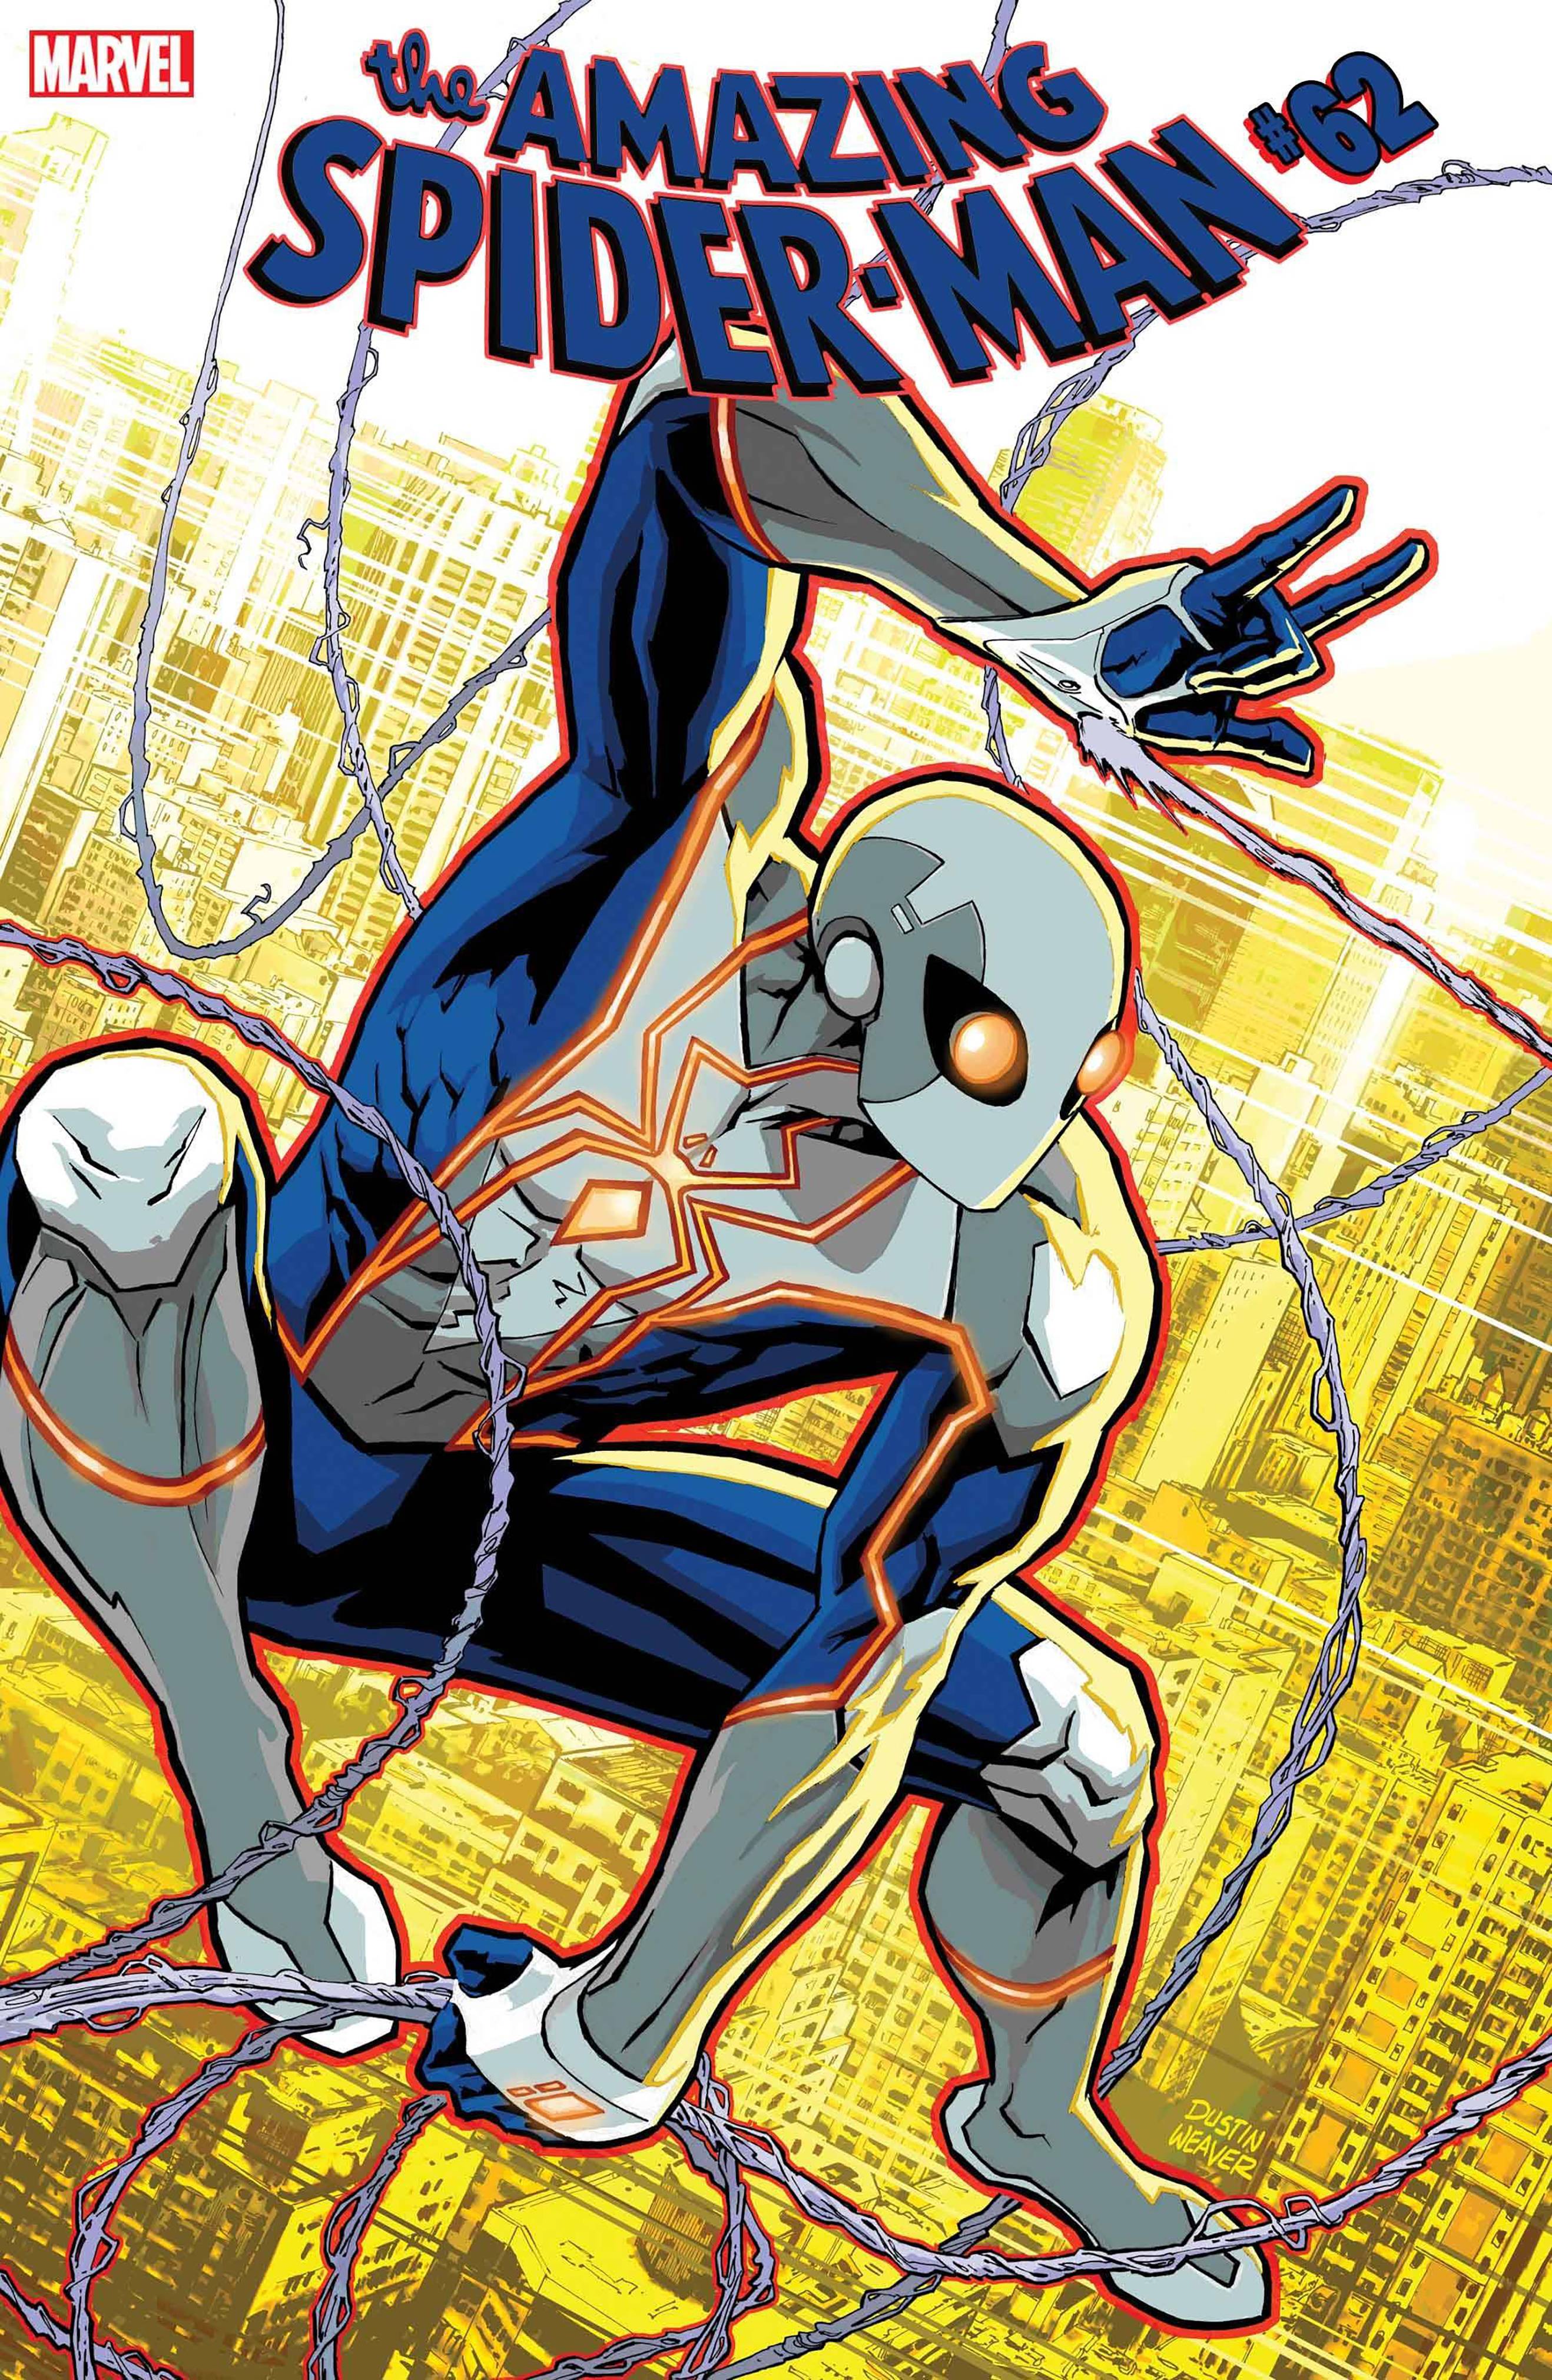 DF AMAZING SPIDERMAN #62 SPENCER SGN